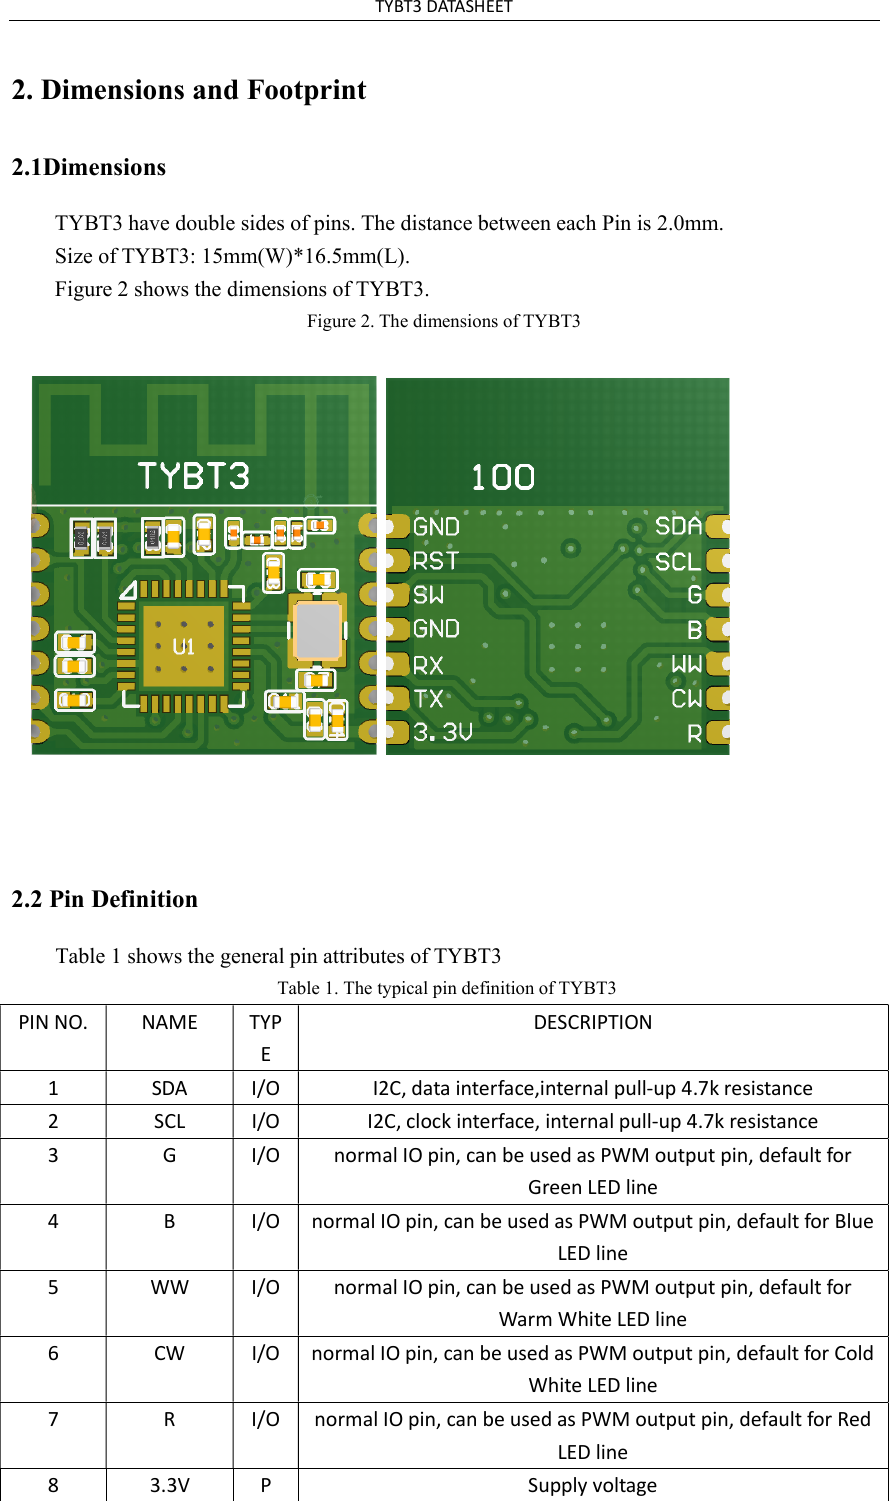 TYBT3 DATASHEET 2. Dimensions and Footprint2.1Dimensions TYBT3 have double sides of pins. The distance between each Pin is 2.0mm. Size of TYBT3: 15mm(W)*16.5mm(L). Figure 2 shows the dimensions of TYBT3. Figure 2. The dimensions of TYBT3 2.2 Pin Definition Table 1 shows the general pin attributes of TYBT3 Table 1. The typical pin definition of TYBT3 PIN NO.  NAME  TYPE DESCRIPTION 1  SDA  I/O  I2C, data interface,internal pull-up 4.7k resistance 2  SCL  I/O  I2C, clock interface, internal pull-up 4.7k resistance 3  G  I/O  normal IO pin, can be used as PWM output pin, default for Green LED line 4  B  I/O  normal IO pin, can be used as PWM output pin, default for Blue LED line 5  WW  I/O  normal IO pin, can be used as PWM output pin, default for Warm White LED line 6  CW  I/O  normal IO pin, can be used as PWM output pin, default for Cold White LED line 7  R  I/O  normal IO pin, can be used as PWM output pin, default for Red LED line 8  3.3V  P  Supply voltage 